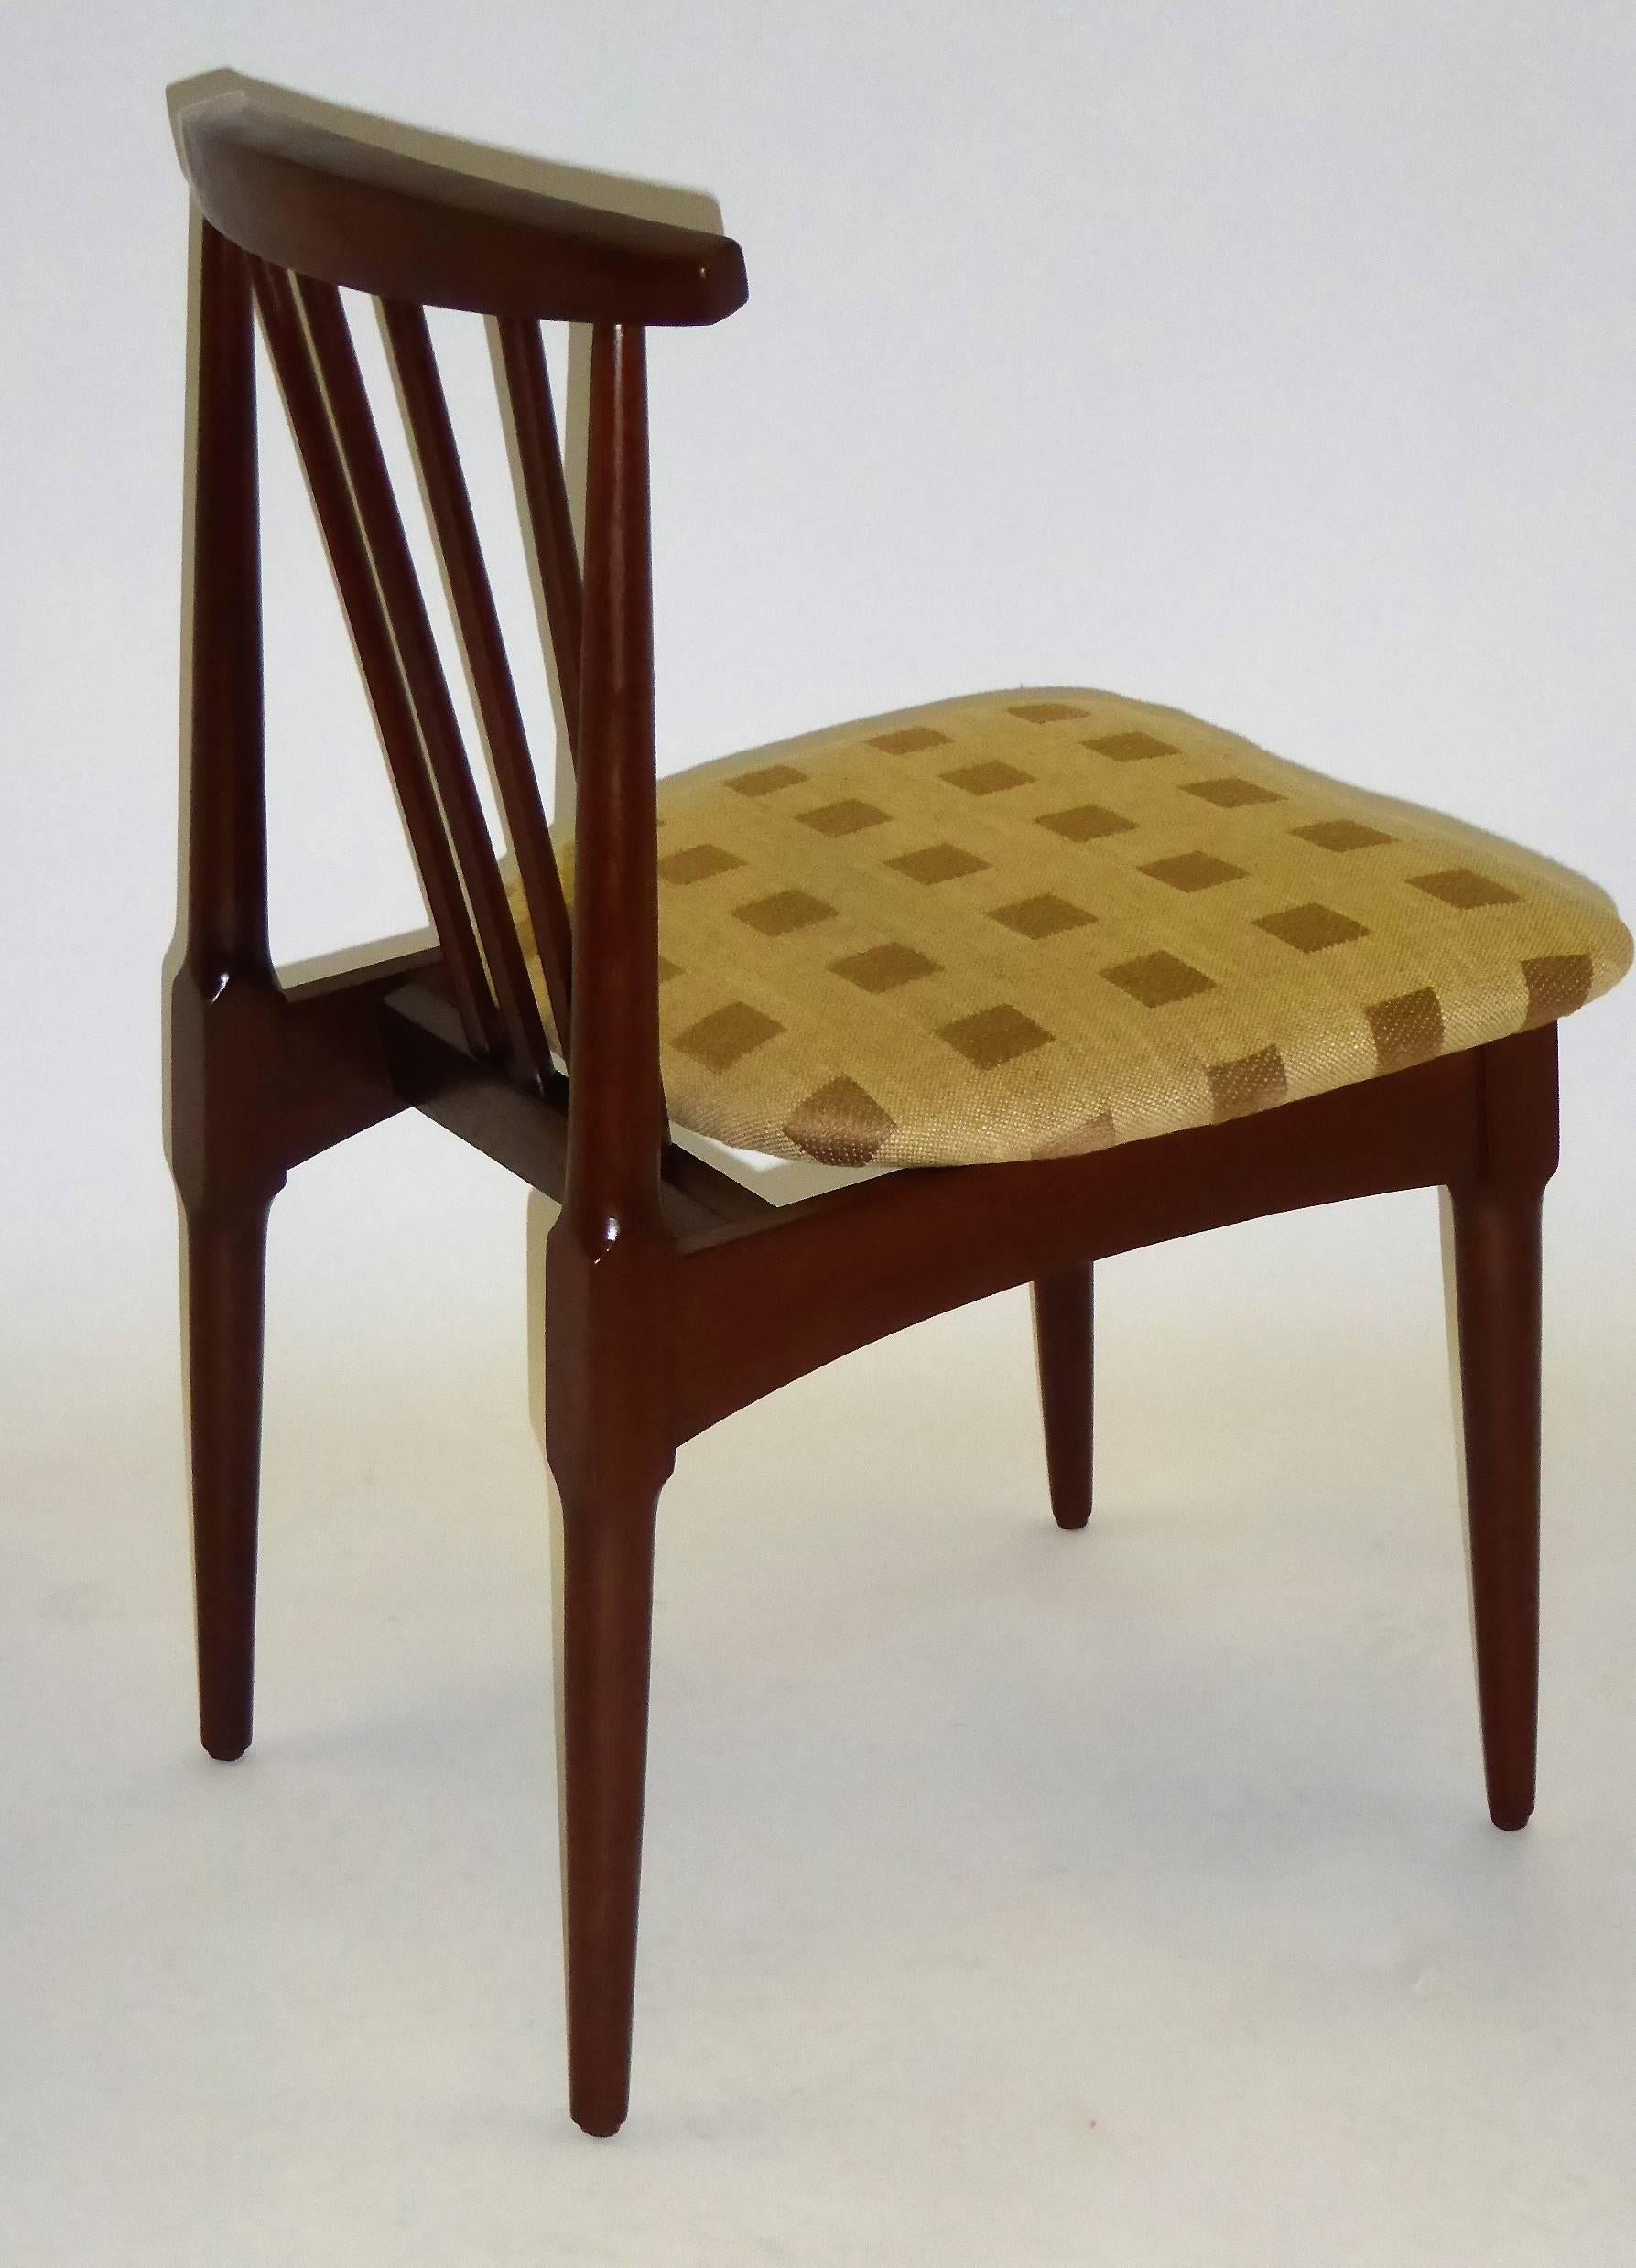 American Six 1950s Danish Modern Style Walnut Spindle Back Dining Chairs